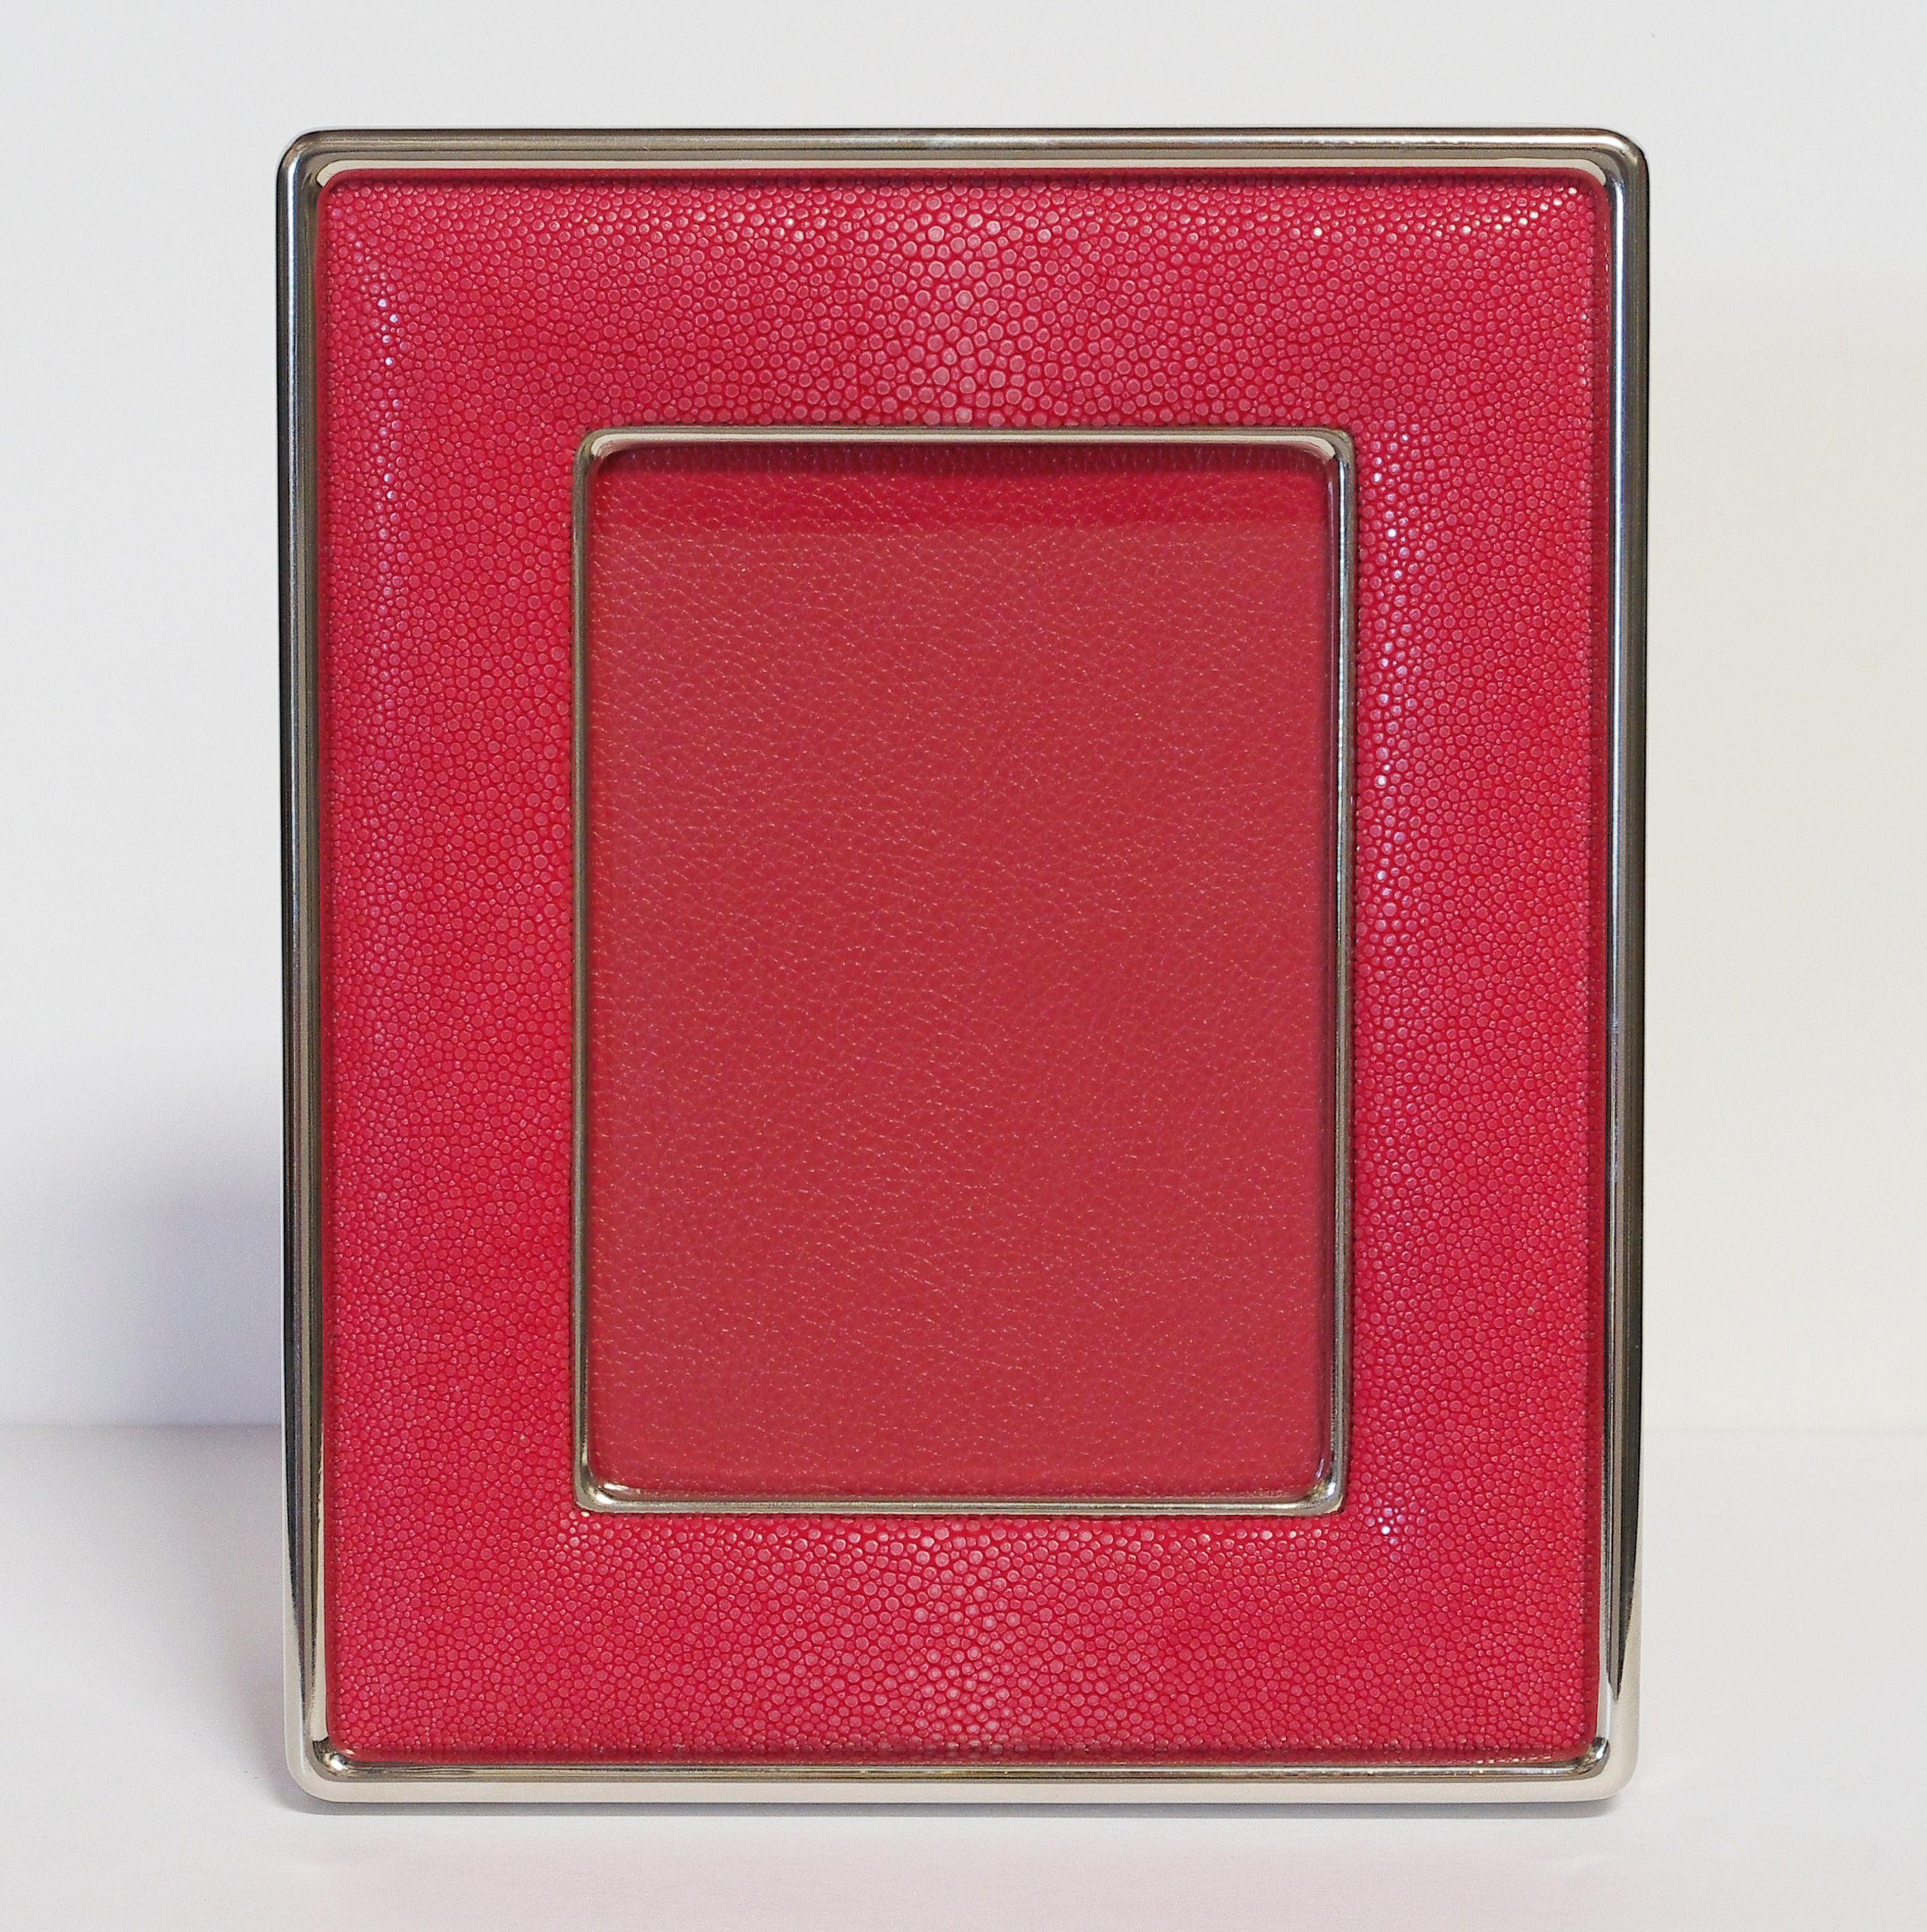 Red shagreen leather and nickel-plated photo frame with presentation red leather box by Fabio Ltd
Height: 10 inches / Width: 8.5 inches / Depth: 1 inch
Photo size: 5 inches by 7 inches
LAST 1 in stock in Los Angeles
Order Reference #: FABIOLTD